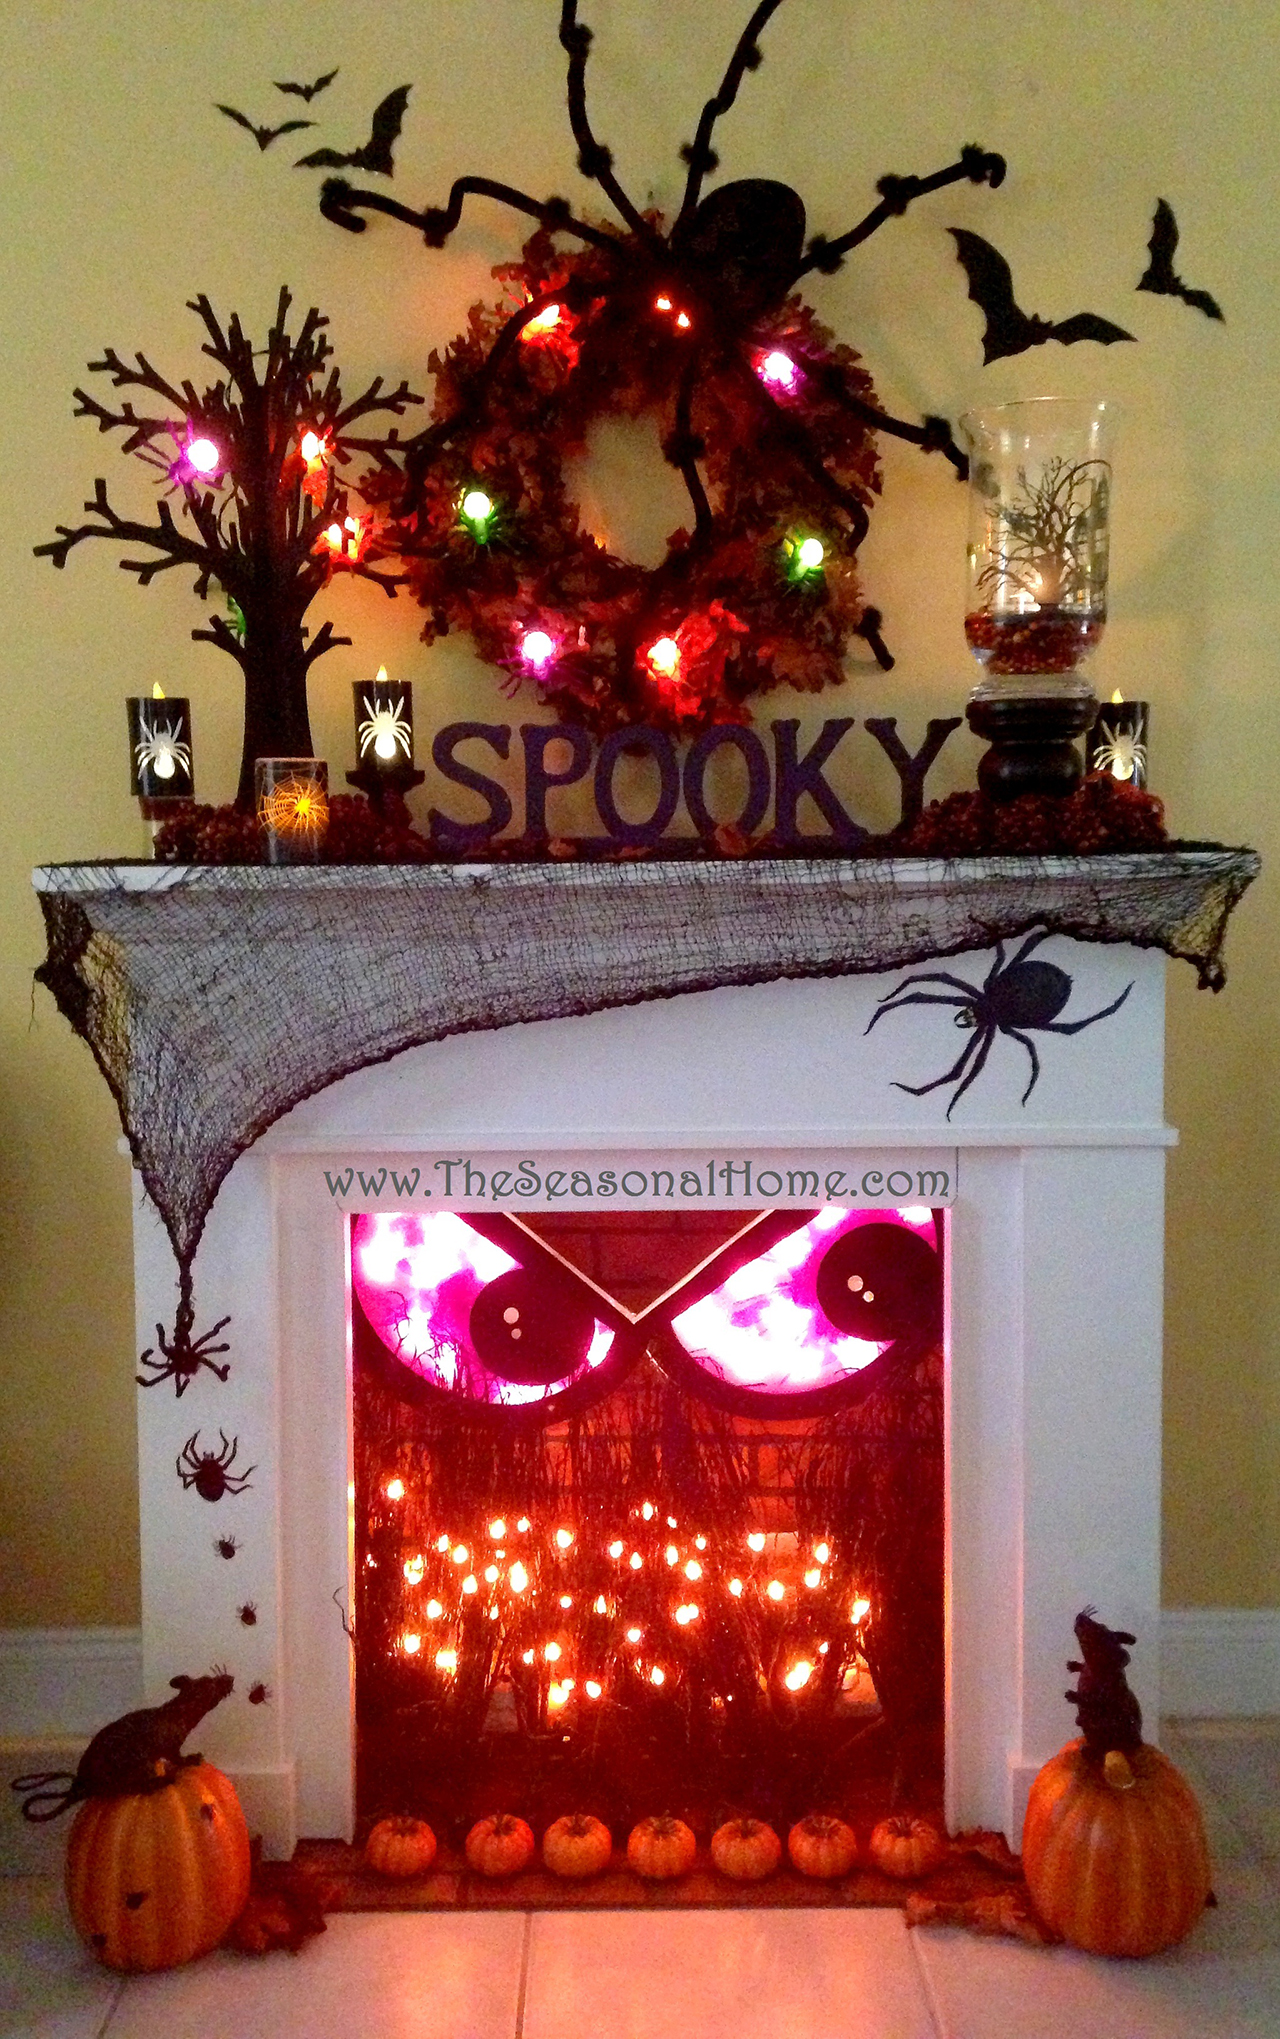 Spooky Fireplace Crackles with Fun